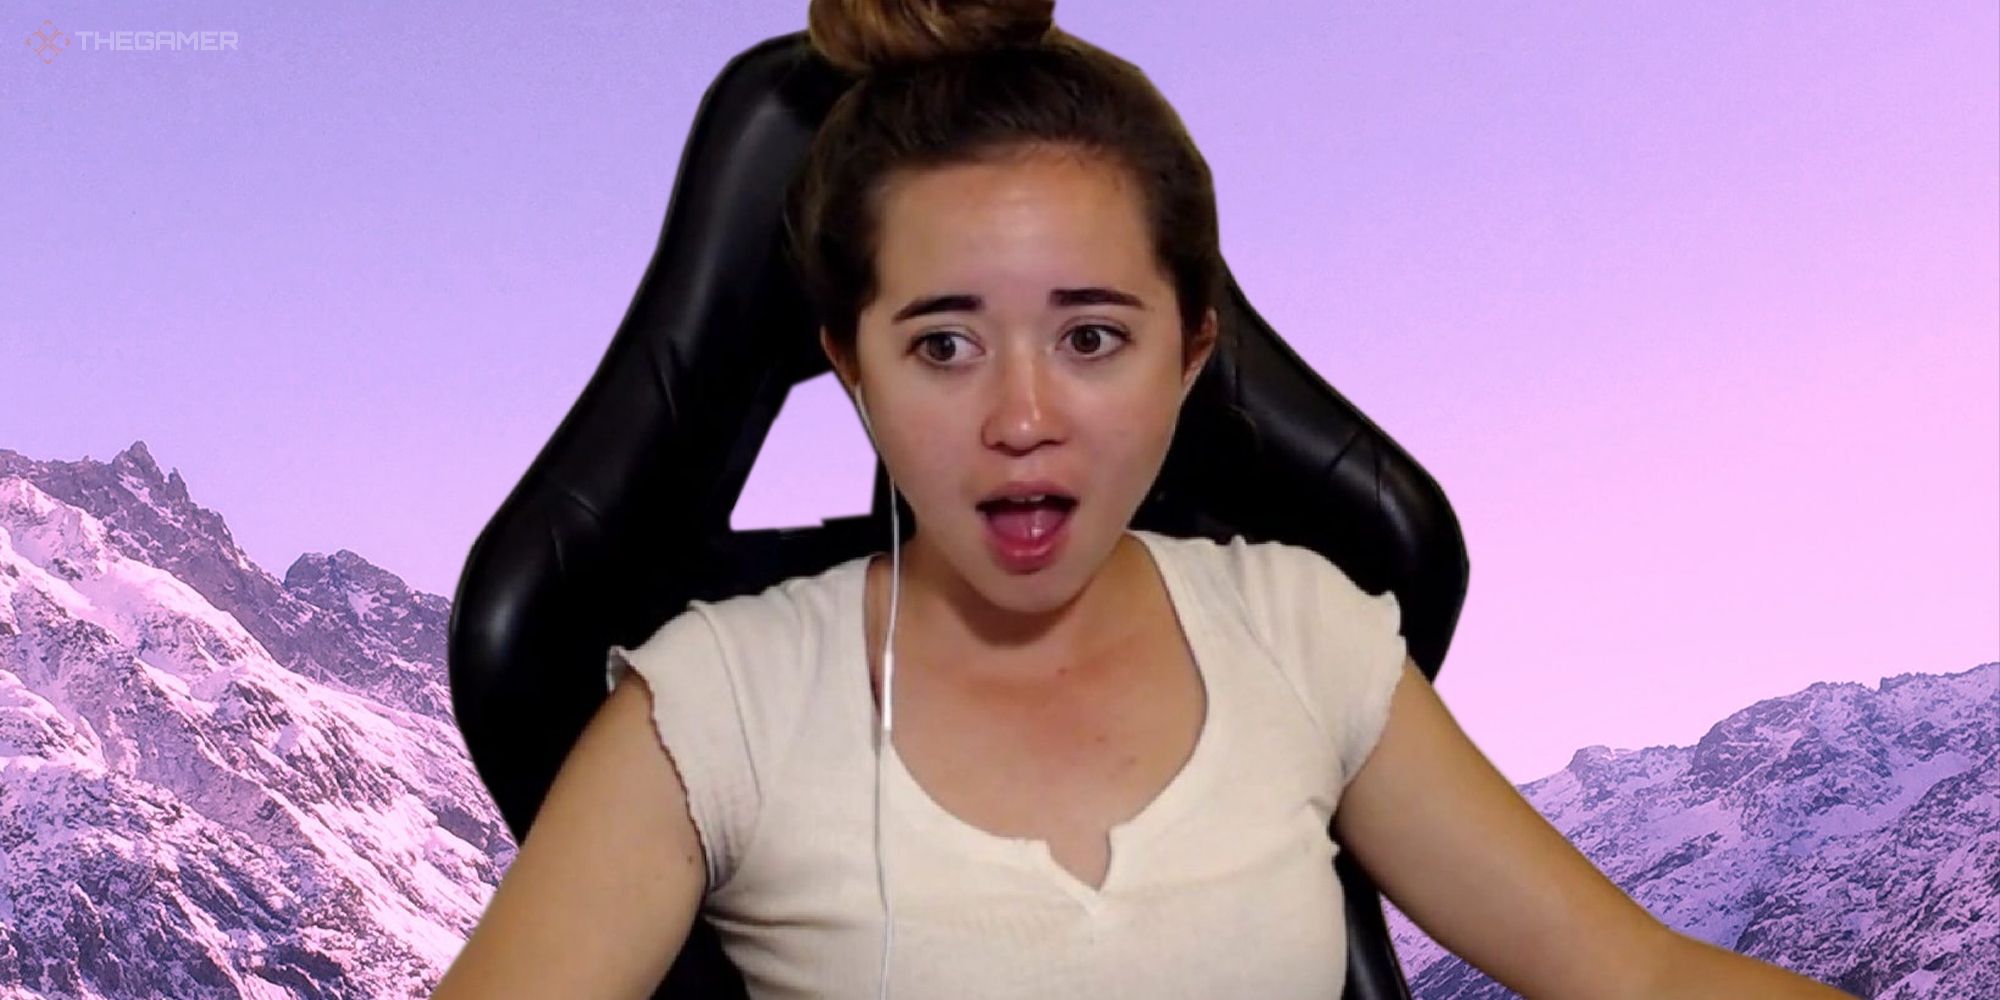 Twitch streamer Maya in a white tee with a shocked expression on her face